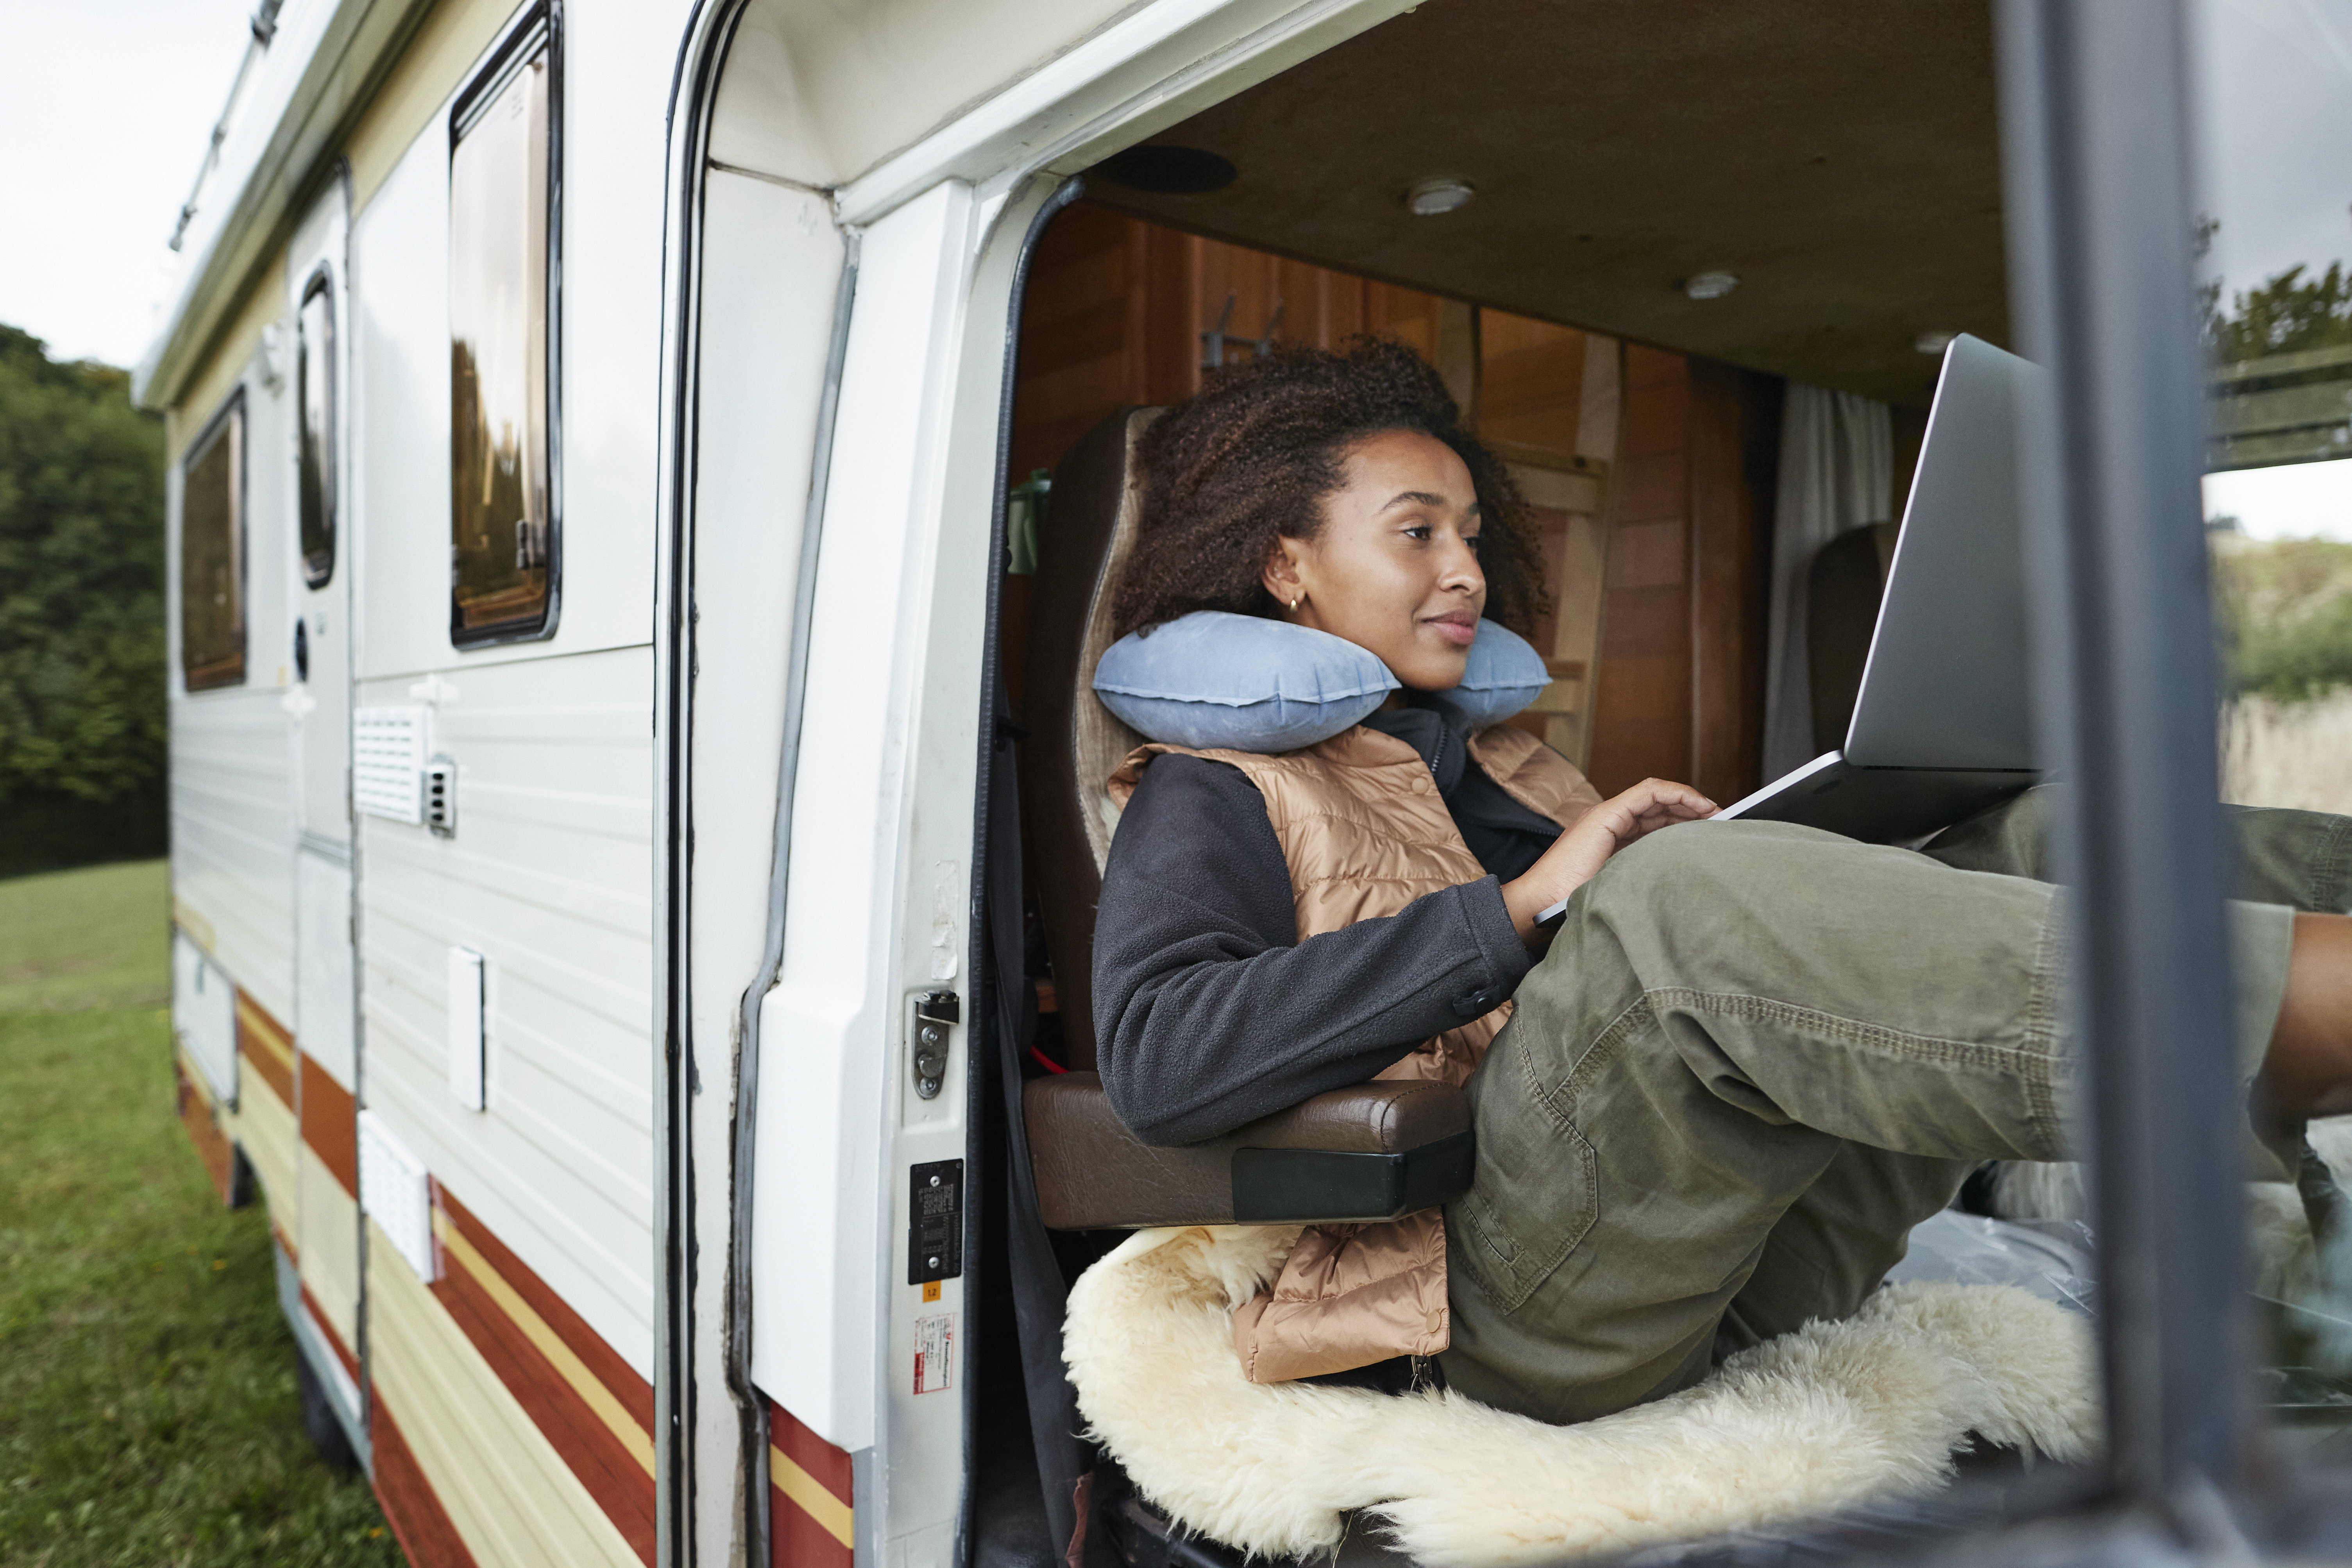 Woman working in an RV on her laptop.